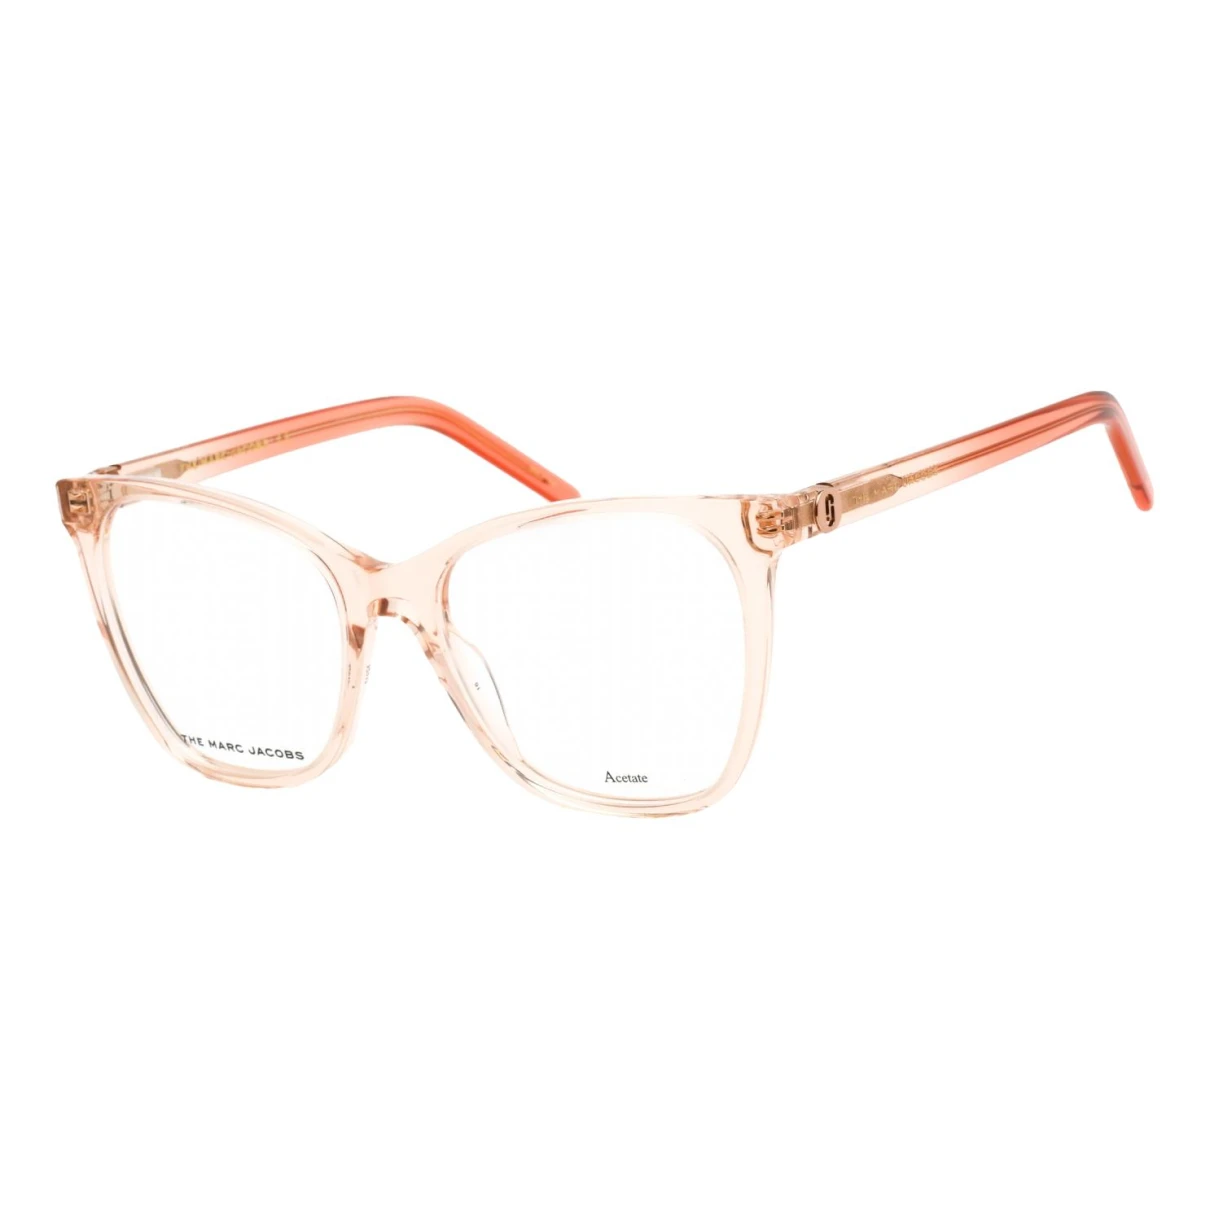 Pre-owned Marc Jacobs Sunglasses In Orange